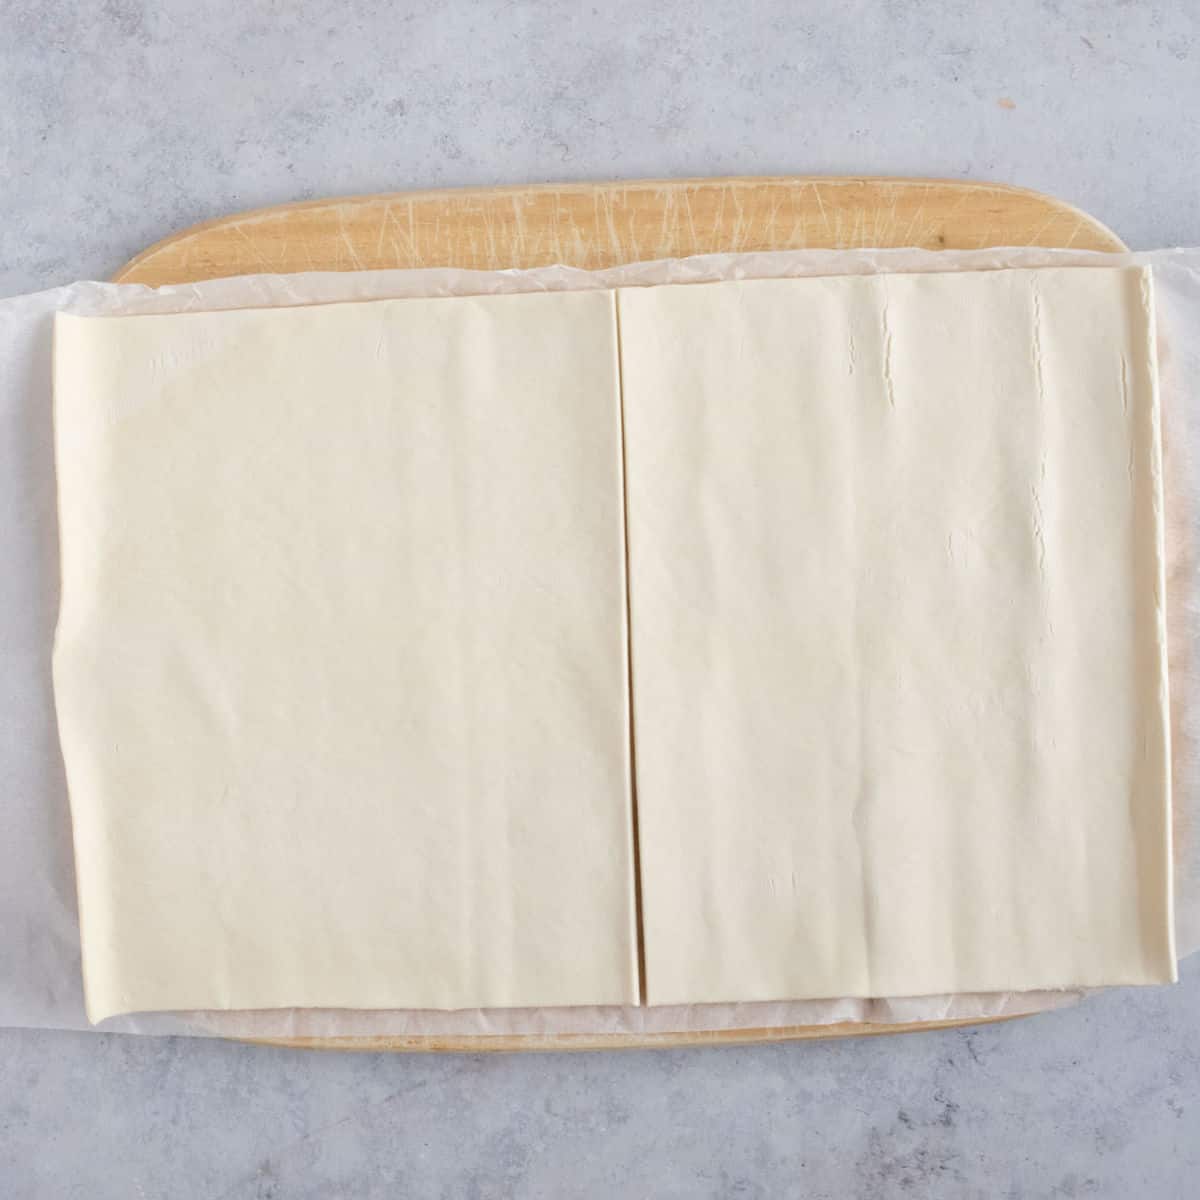 A sheet of puff pastry.